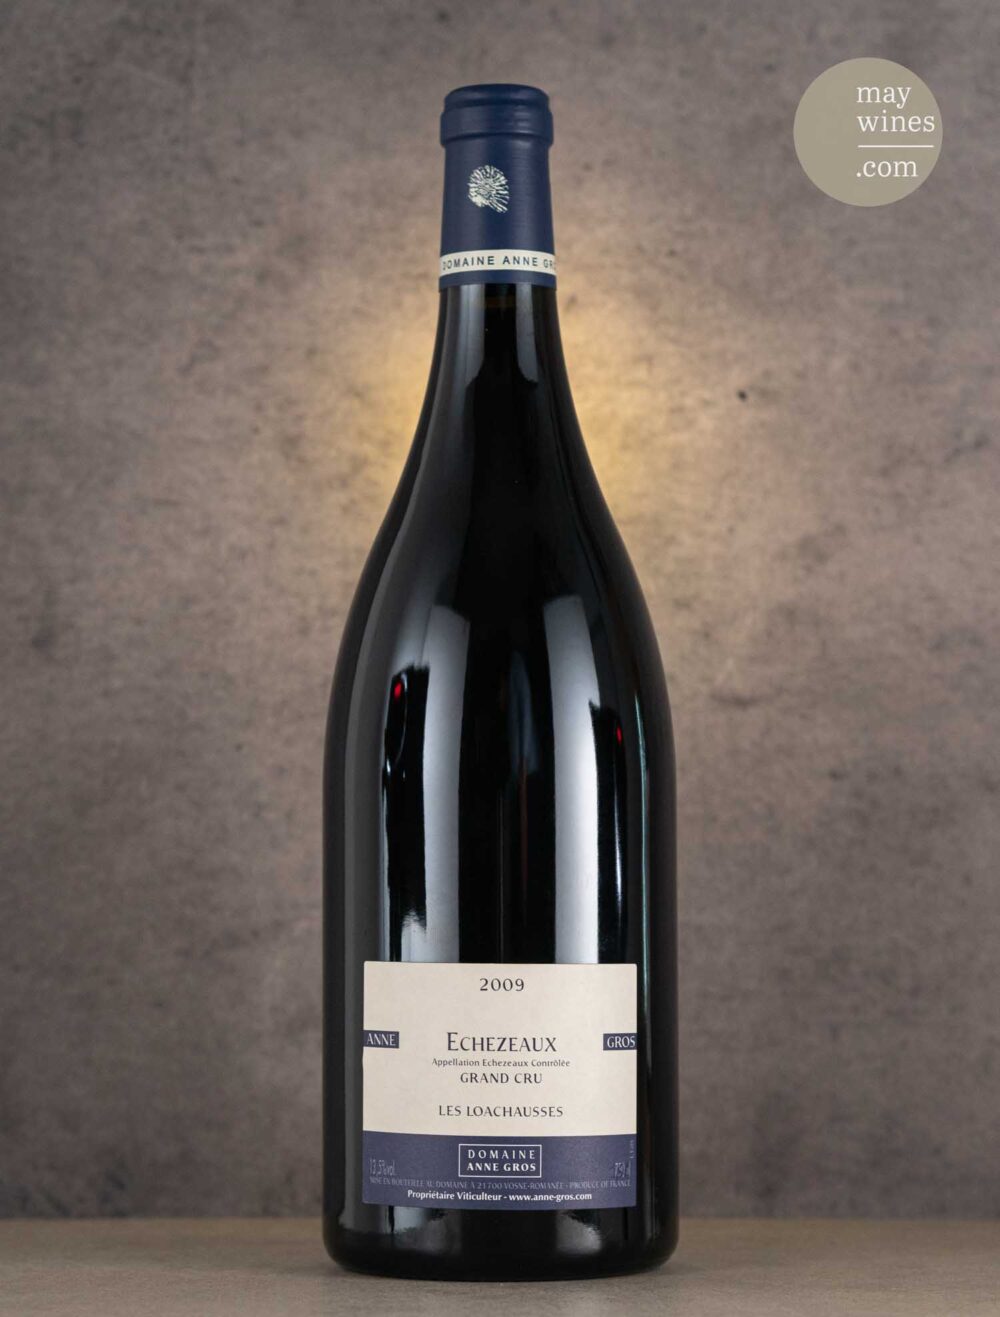 May Wines – Rotwein – 2009 Echezeaux Les Loachausses Grand Cru MAG - Domaine Anne Gros